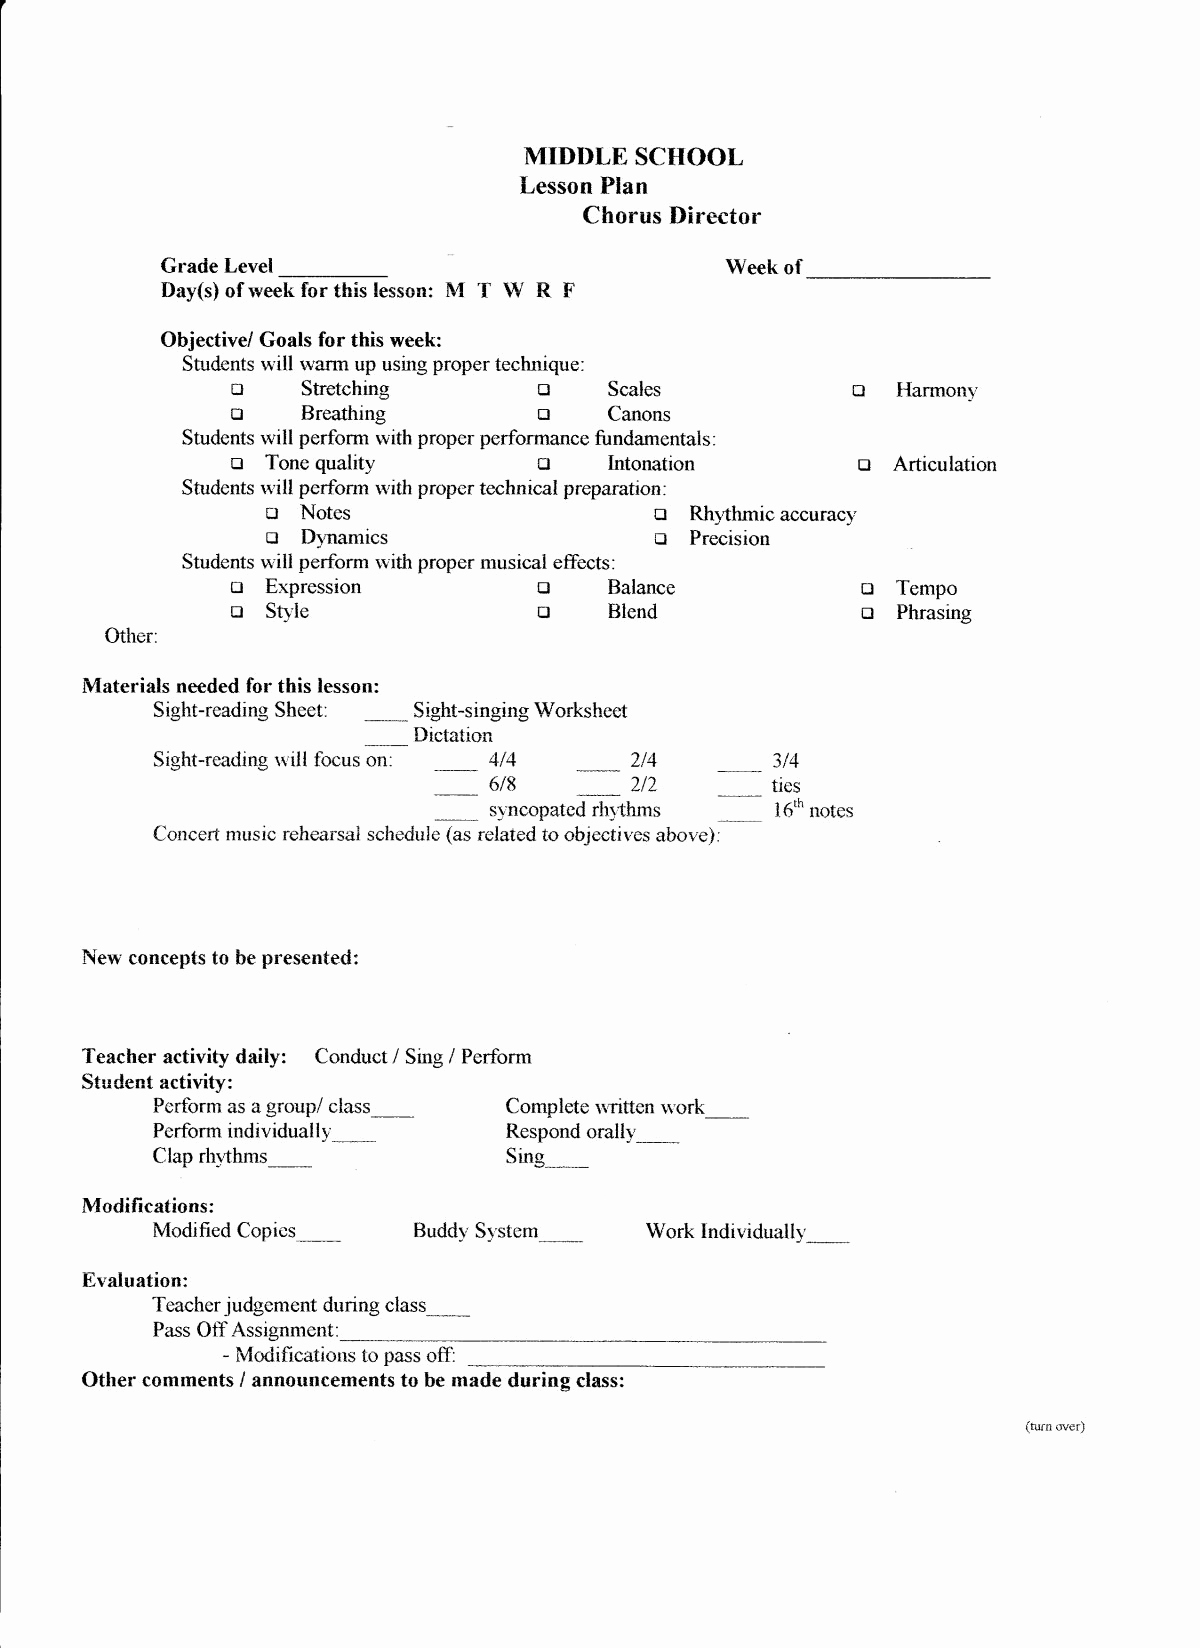 Music Lesson Plan Template Awesome Lesson Plan Template – Middle School Chorus